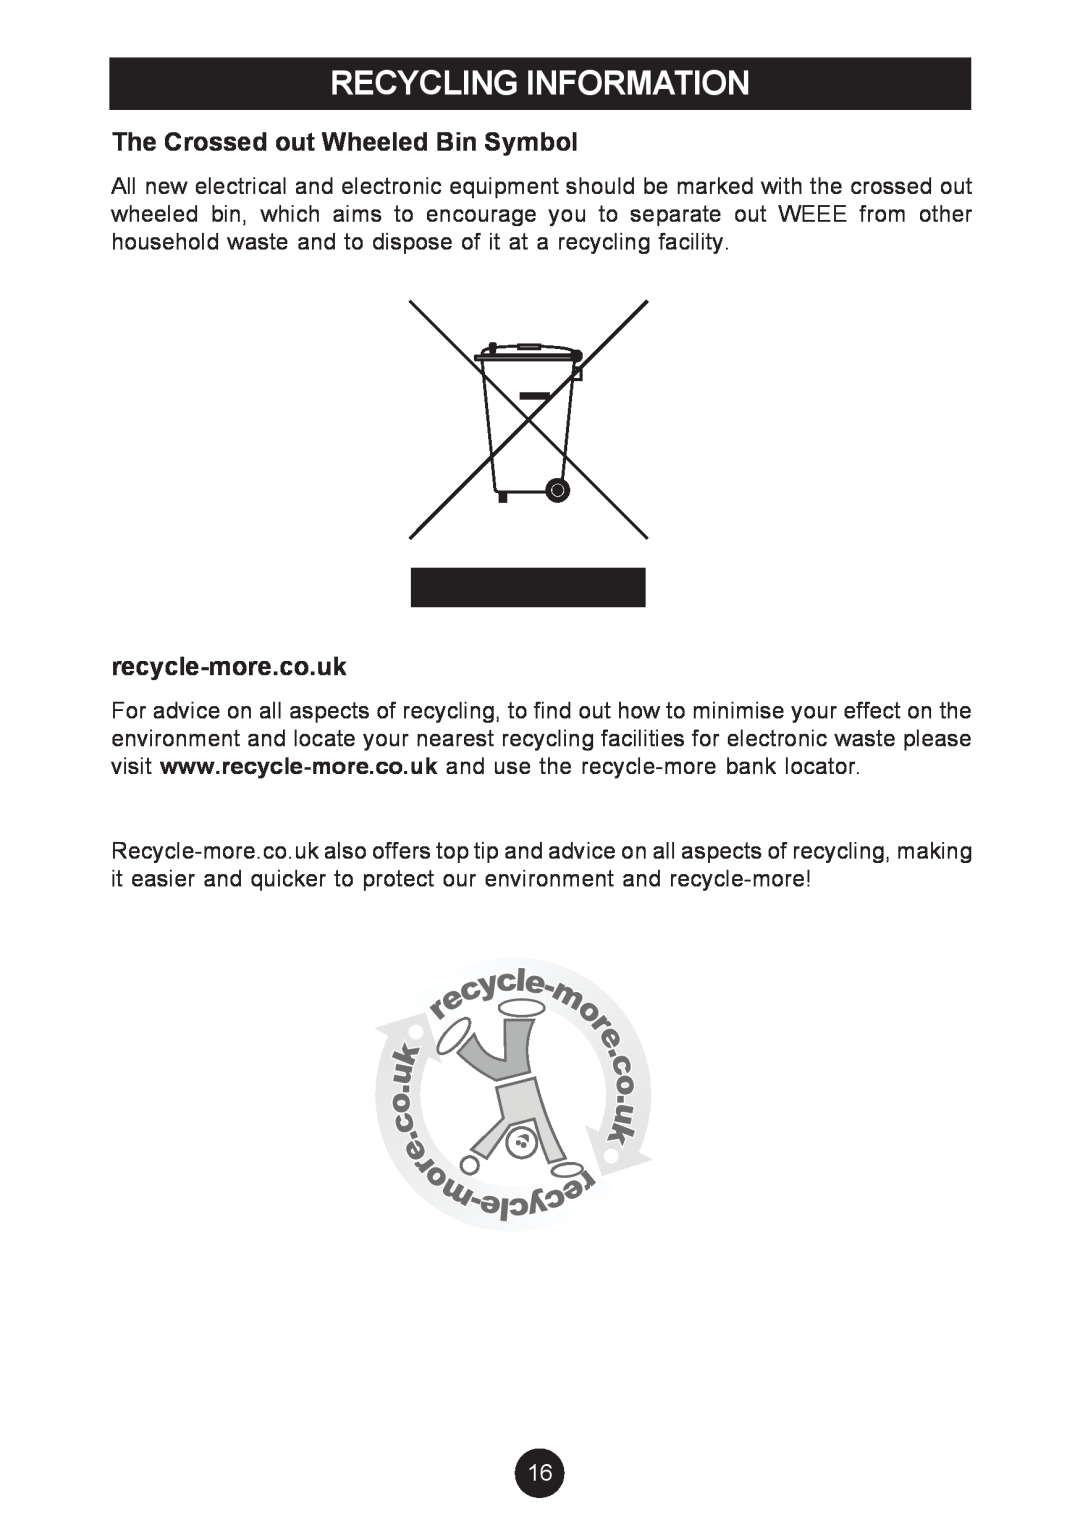 Breville AF5, AF6 manual The Crossed out Wheeled Bin Symbol, recycle-more.co.uk, Recycling Information 